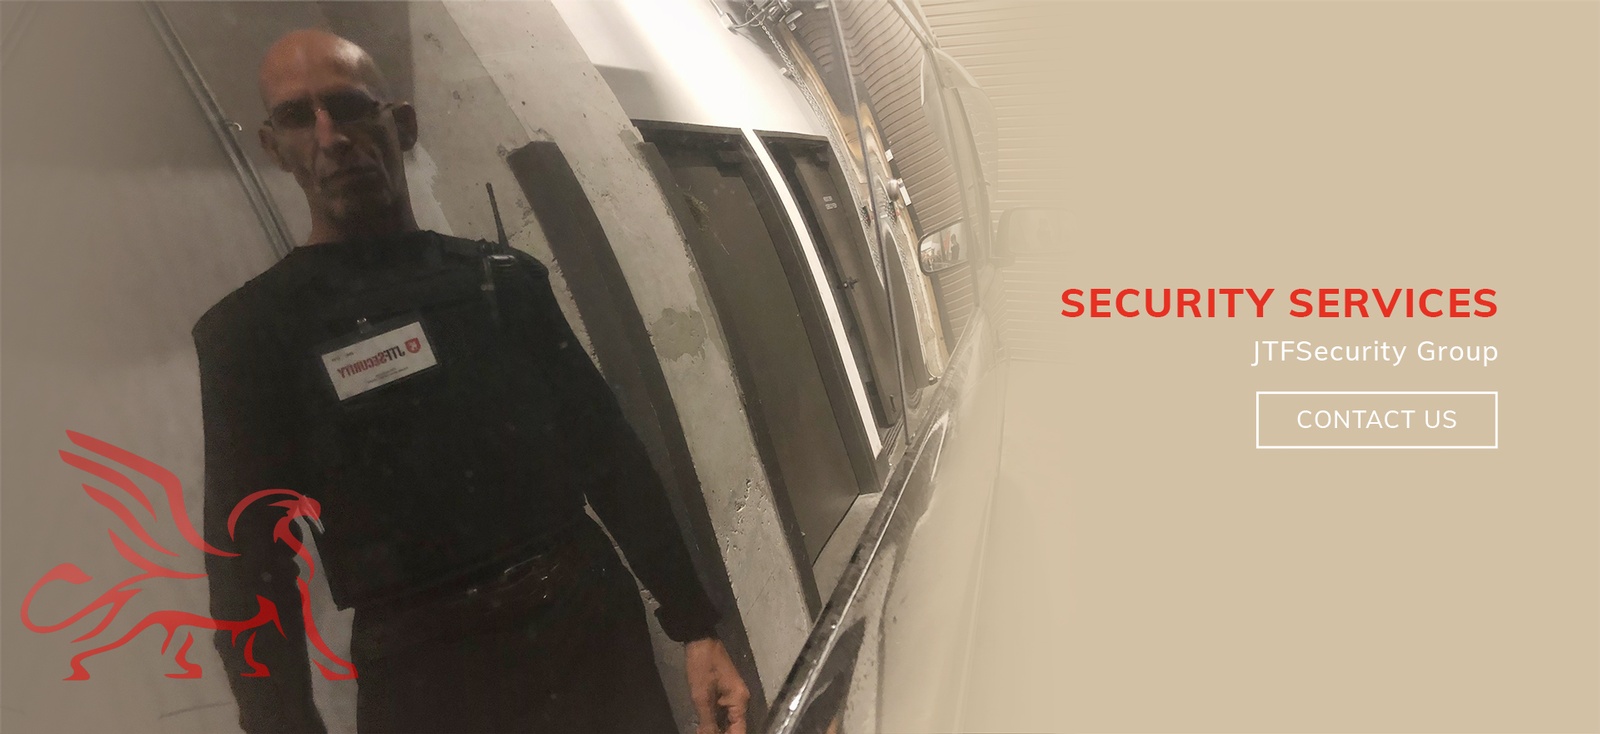 Toronto Security Guard Services by JTFSecurity Group